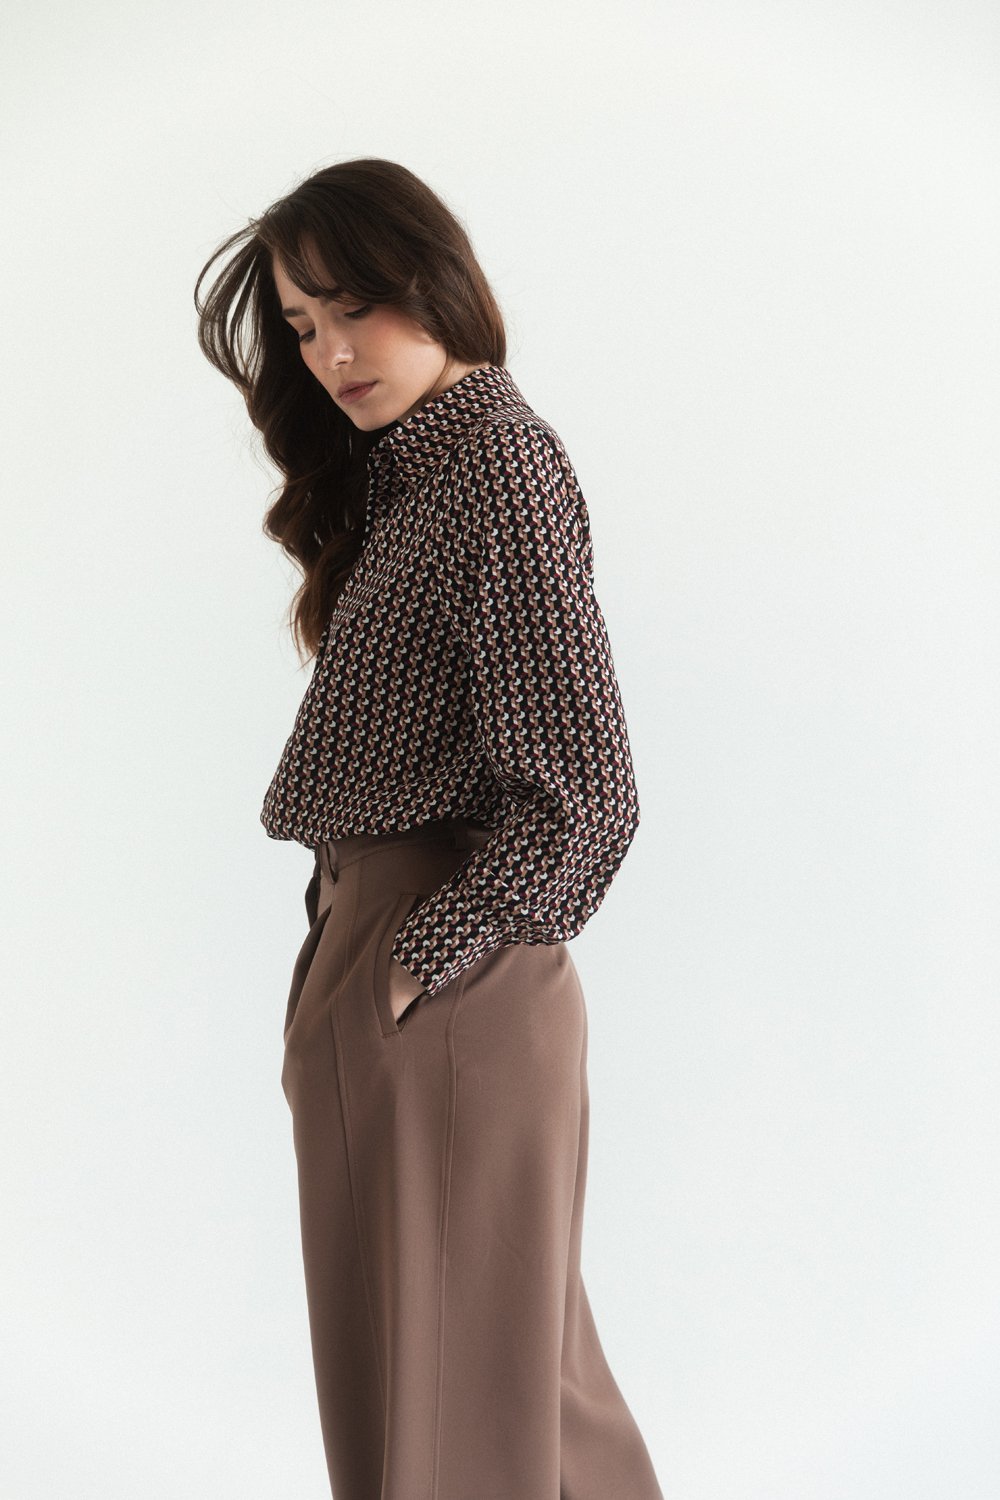 Straight fit trousers in mocha color